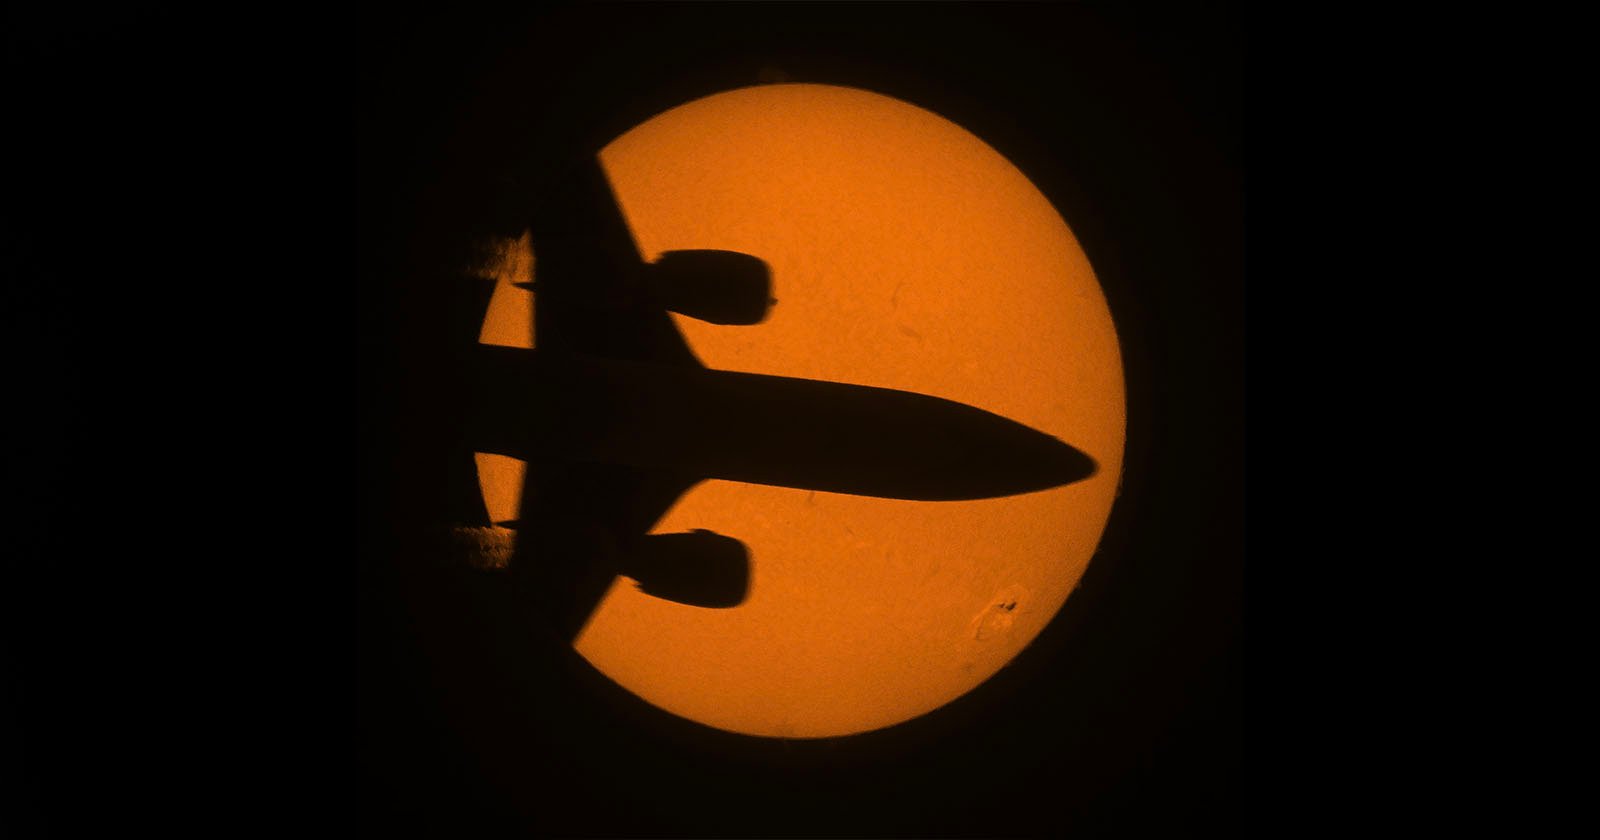  incredible shot airplane crossing sun was captured 